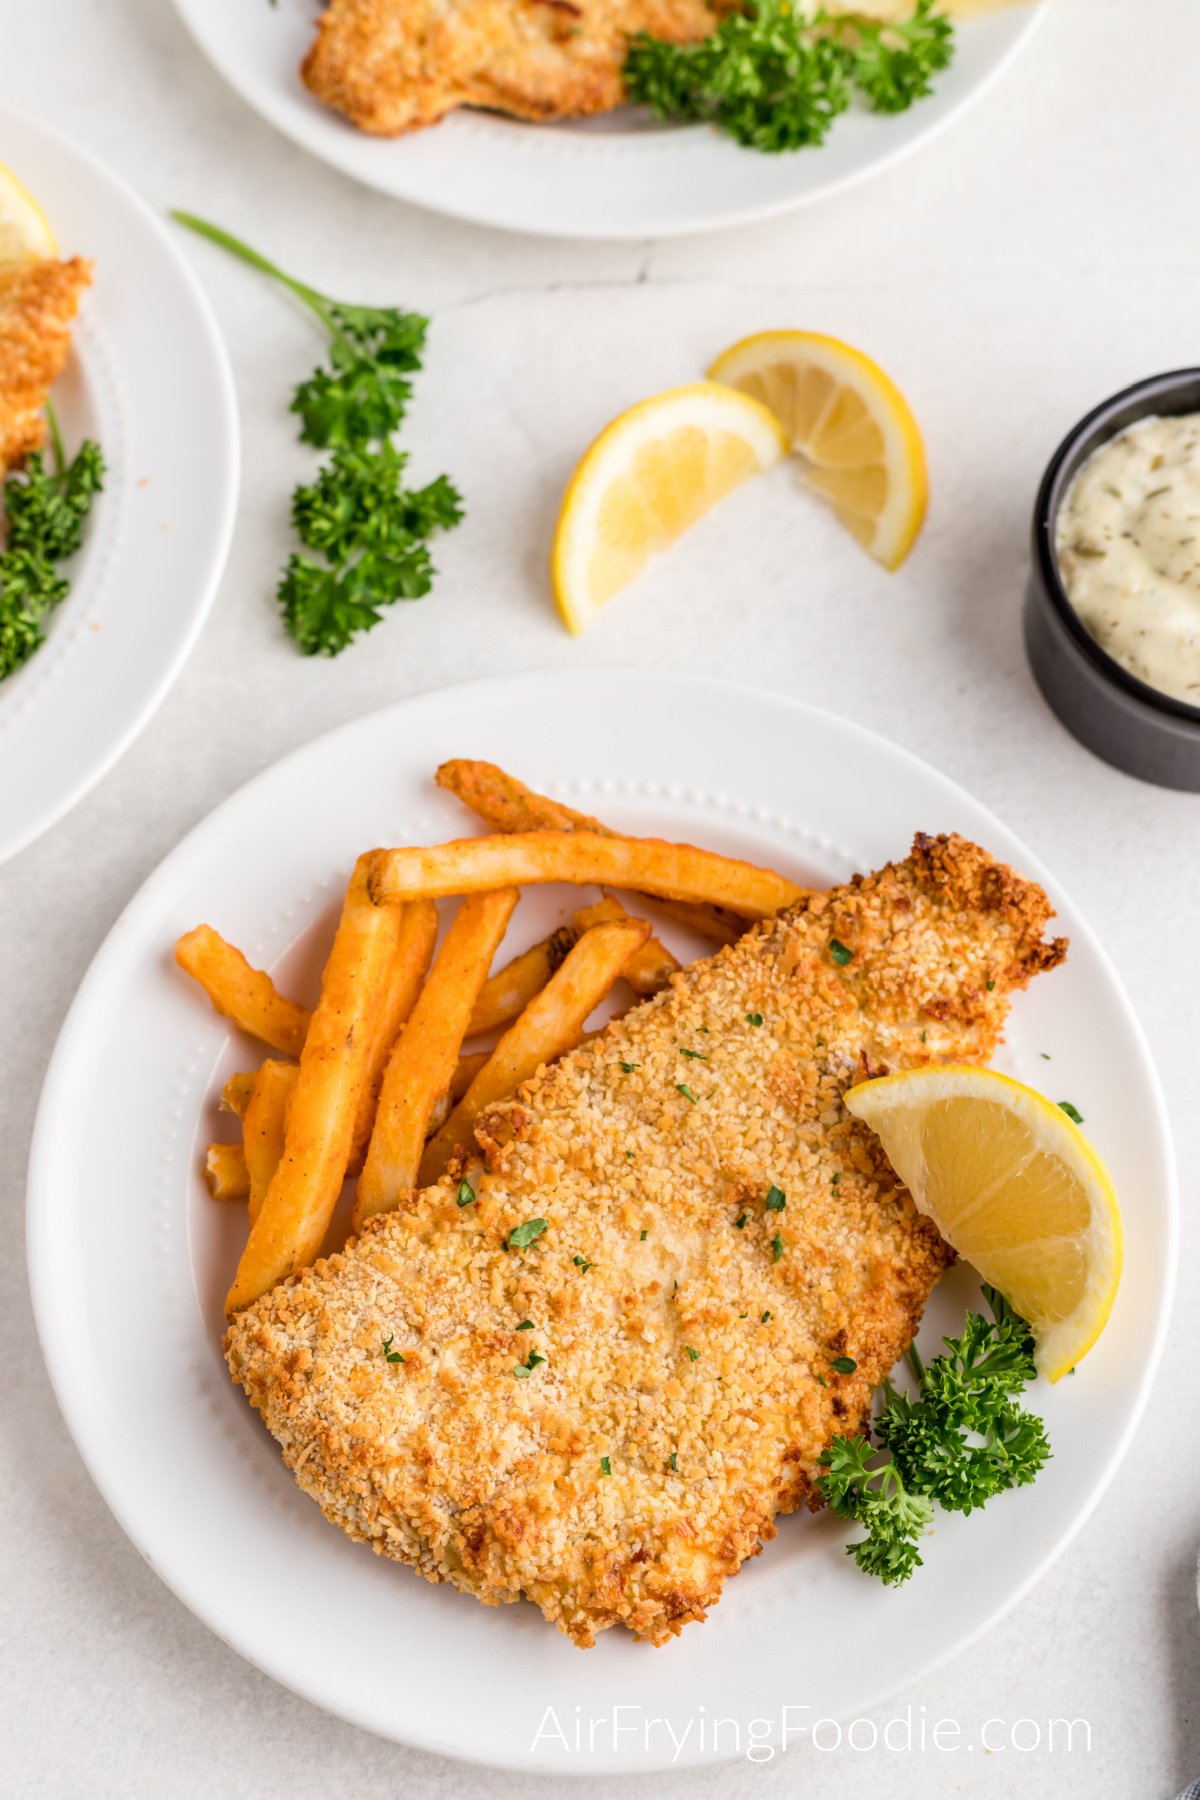 Air fryer fish served on a plate with a side of fries and lemon wedge.